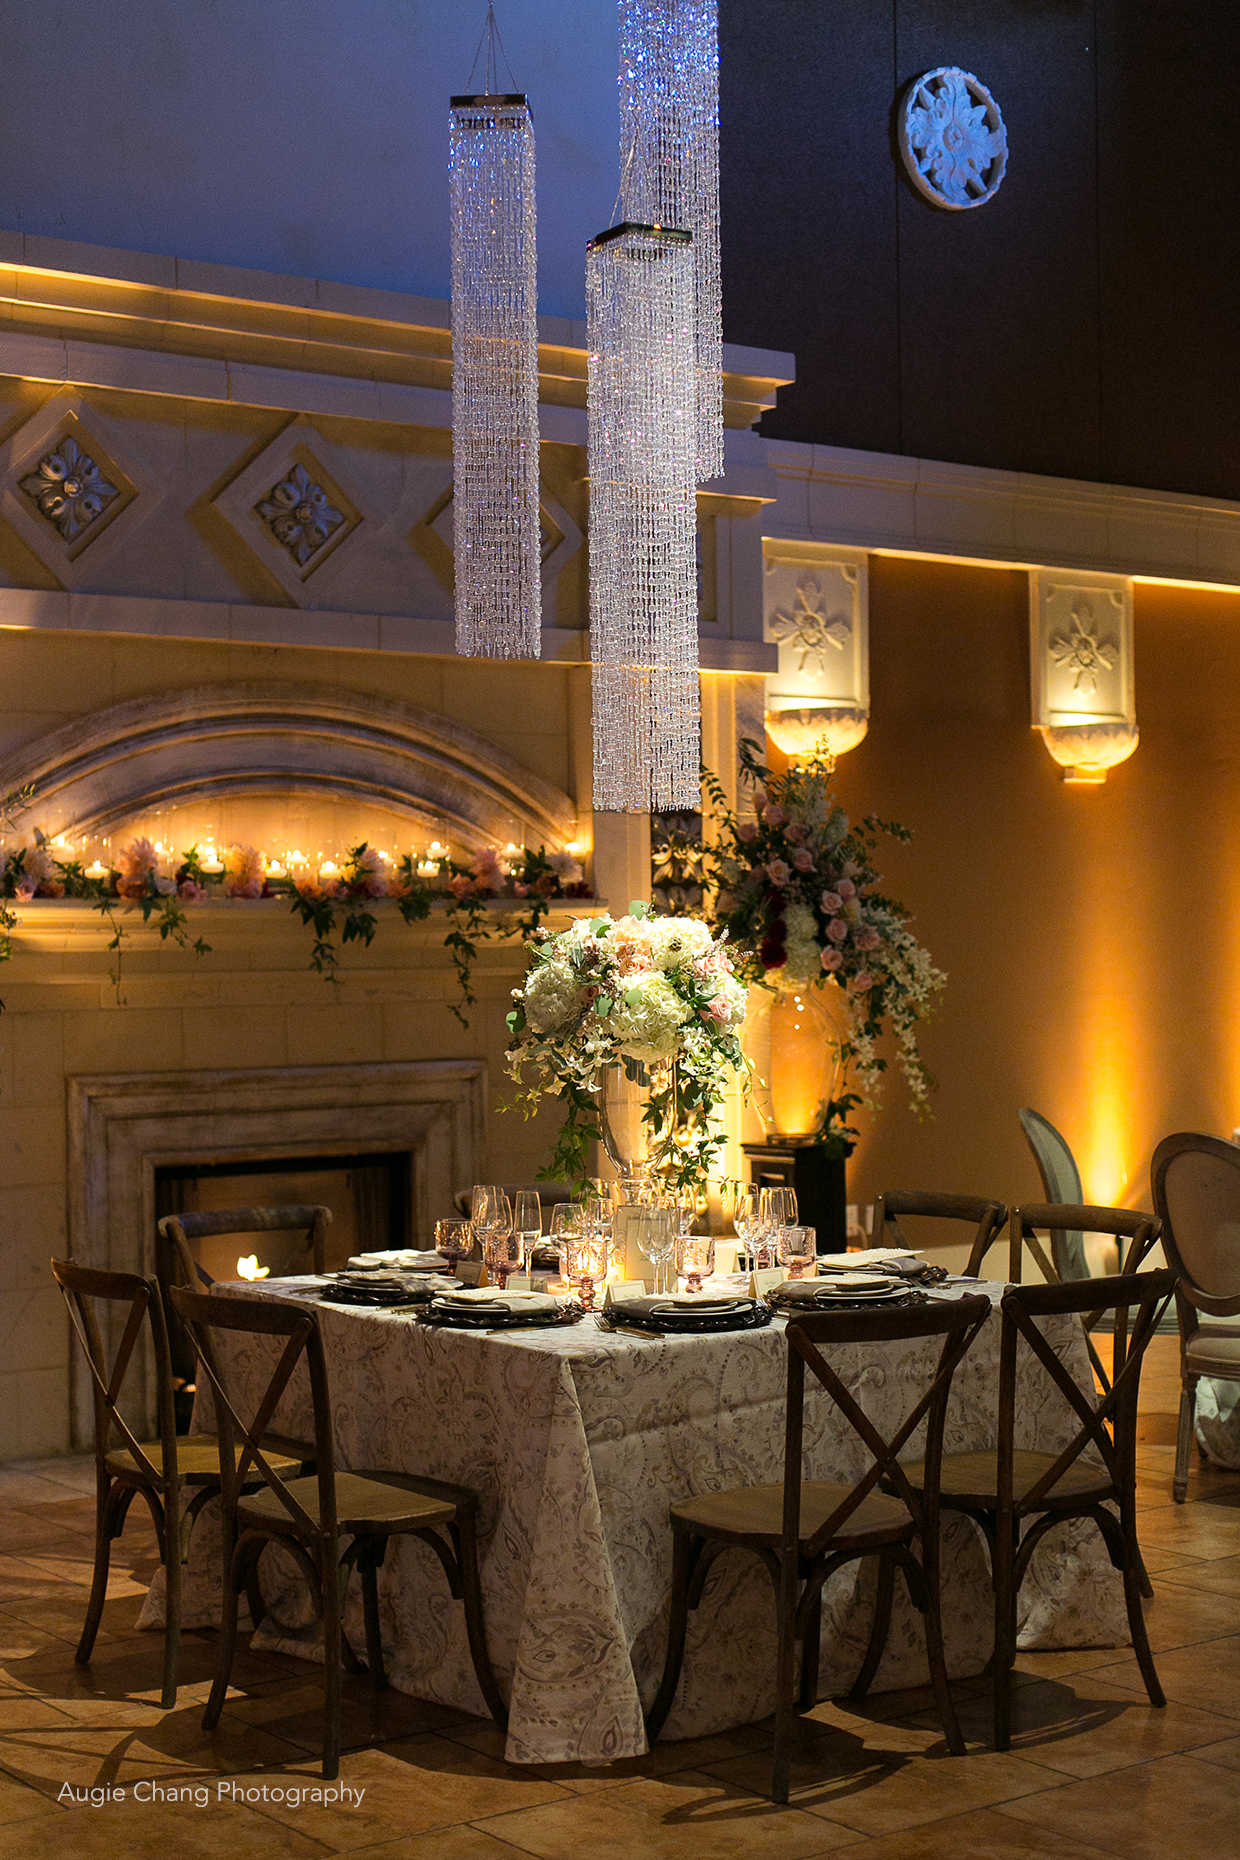 Elegant wedding tabletop at Casa Real at Ruby Hill Winery (www.casarealevents.com).  Photo by: Augie Chang Photography; Florals: Delford West Flowers; Lighting: Fantasy Sound Event Services; Tabletop Rentals and Furniture: Pleasanton Rentals